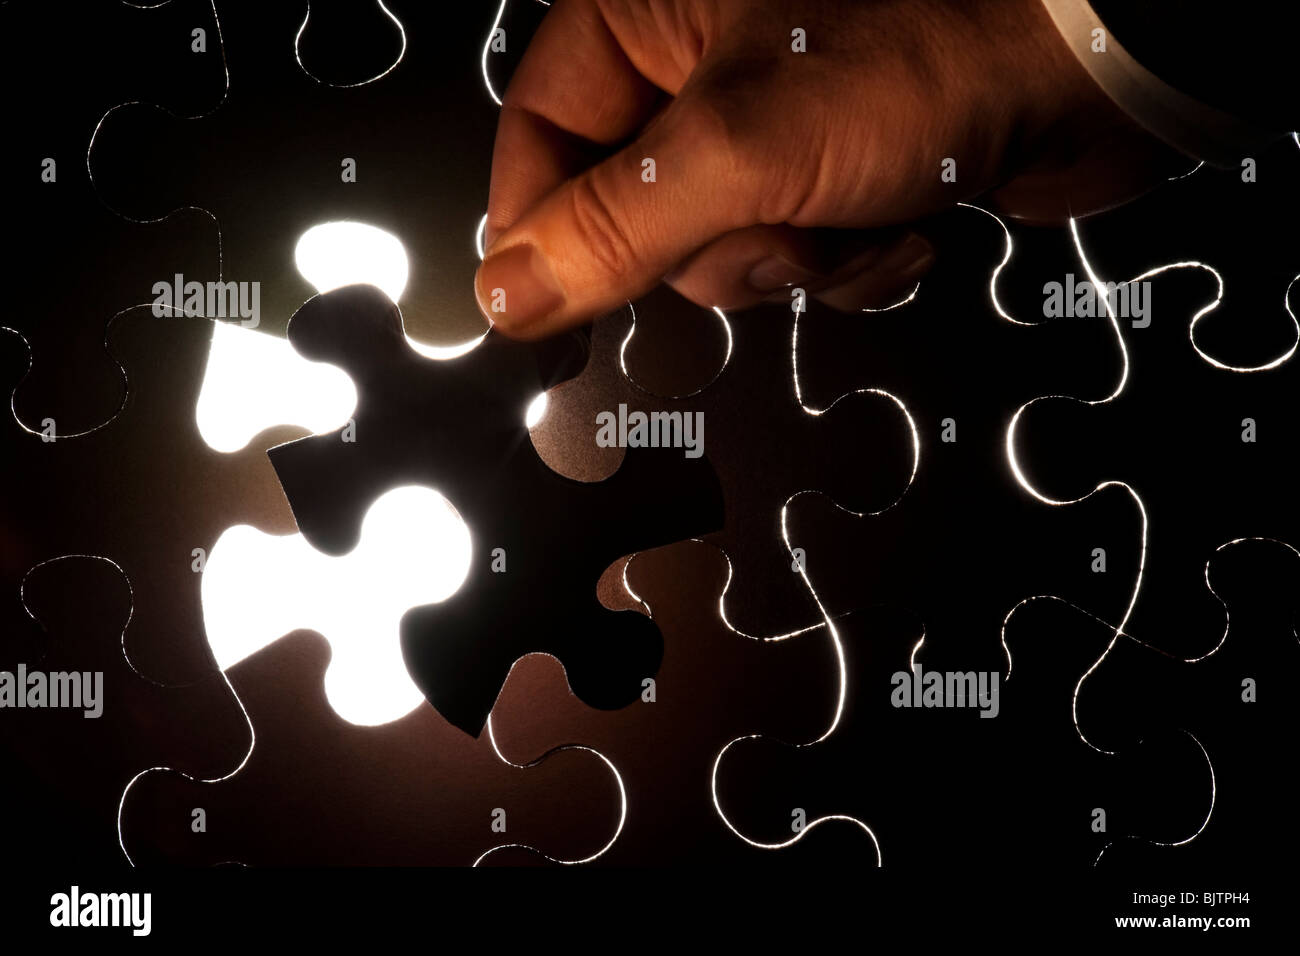 Hand inserting piece of jigsaw puzzle Stock Photo